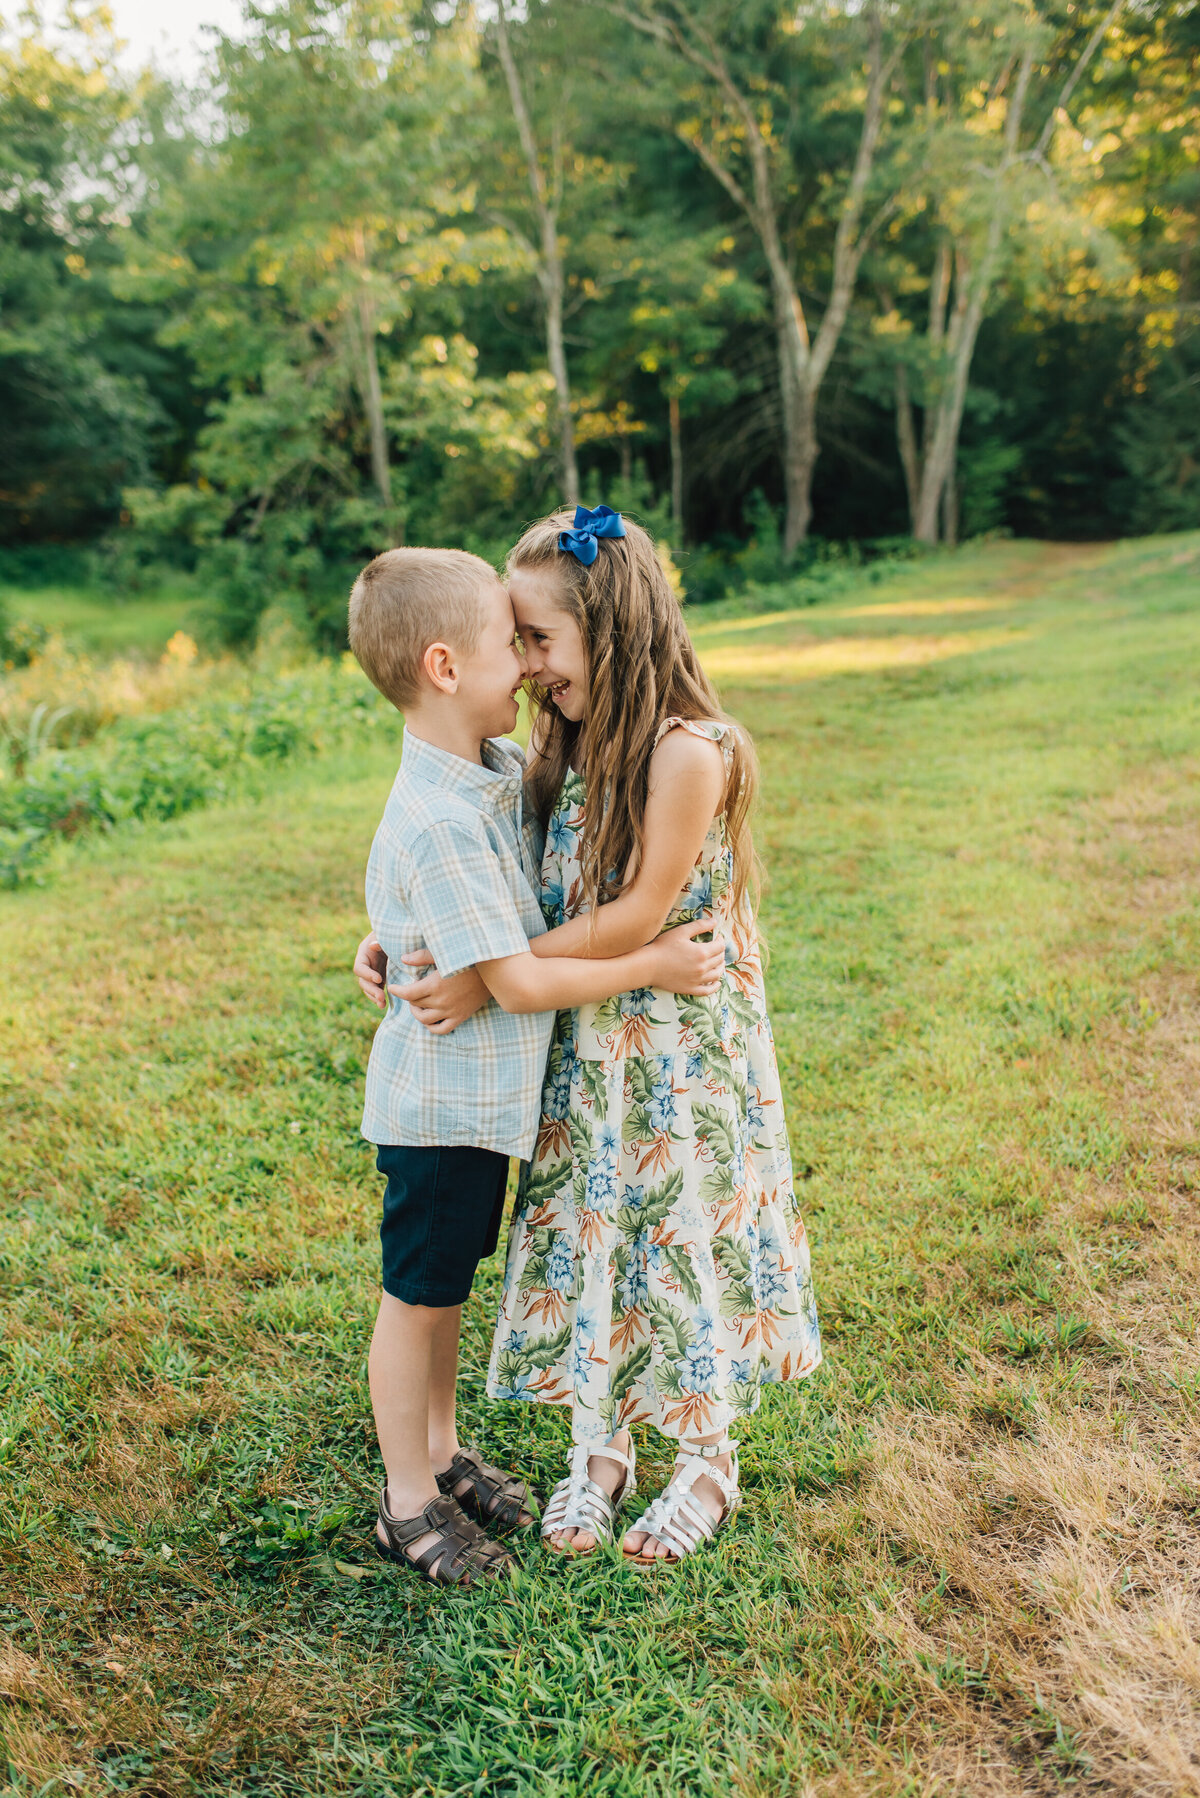 Brother and sister touching foreheads in a field